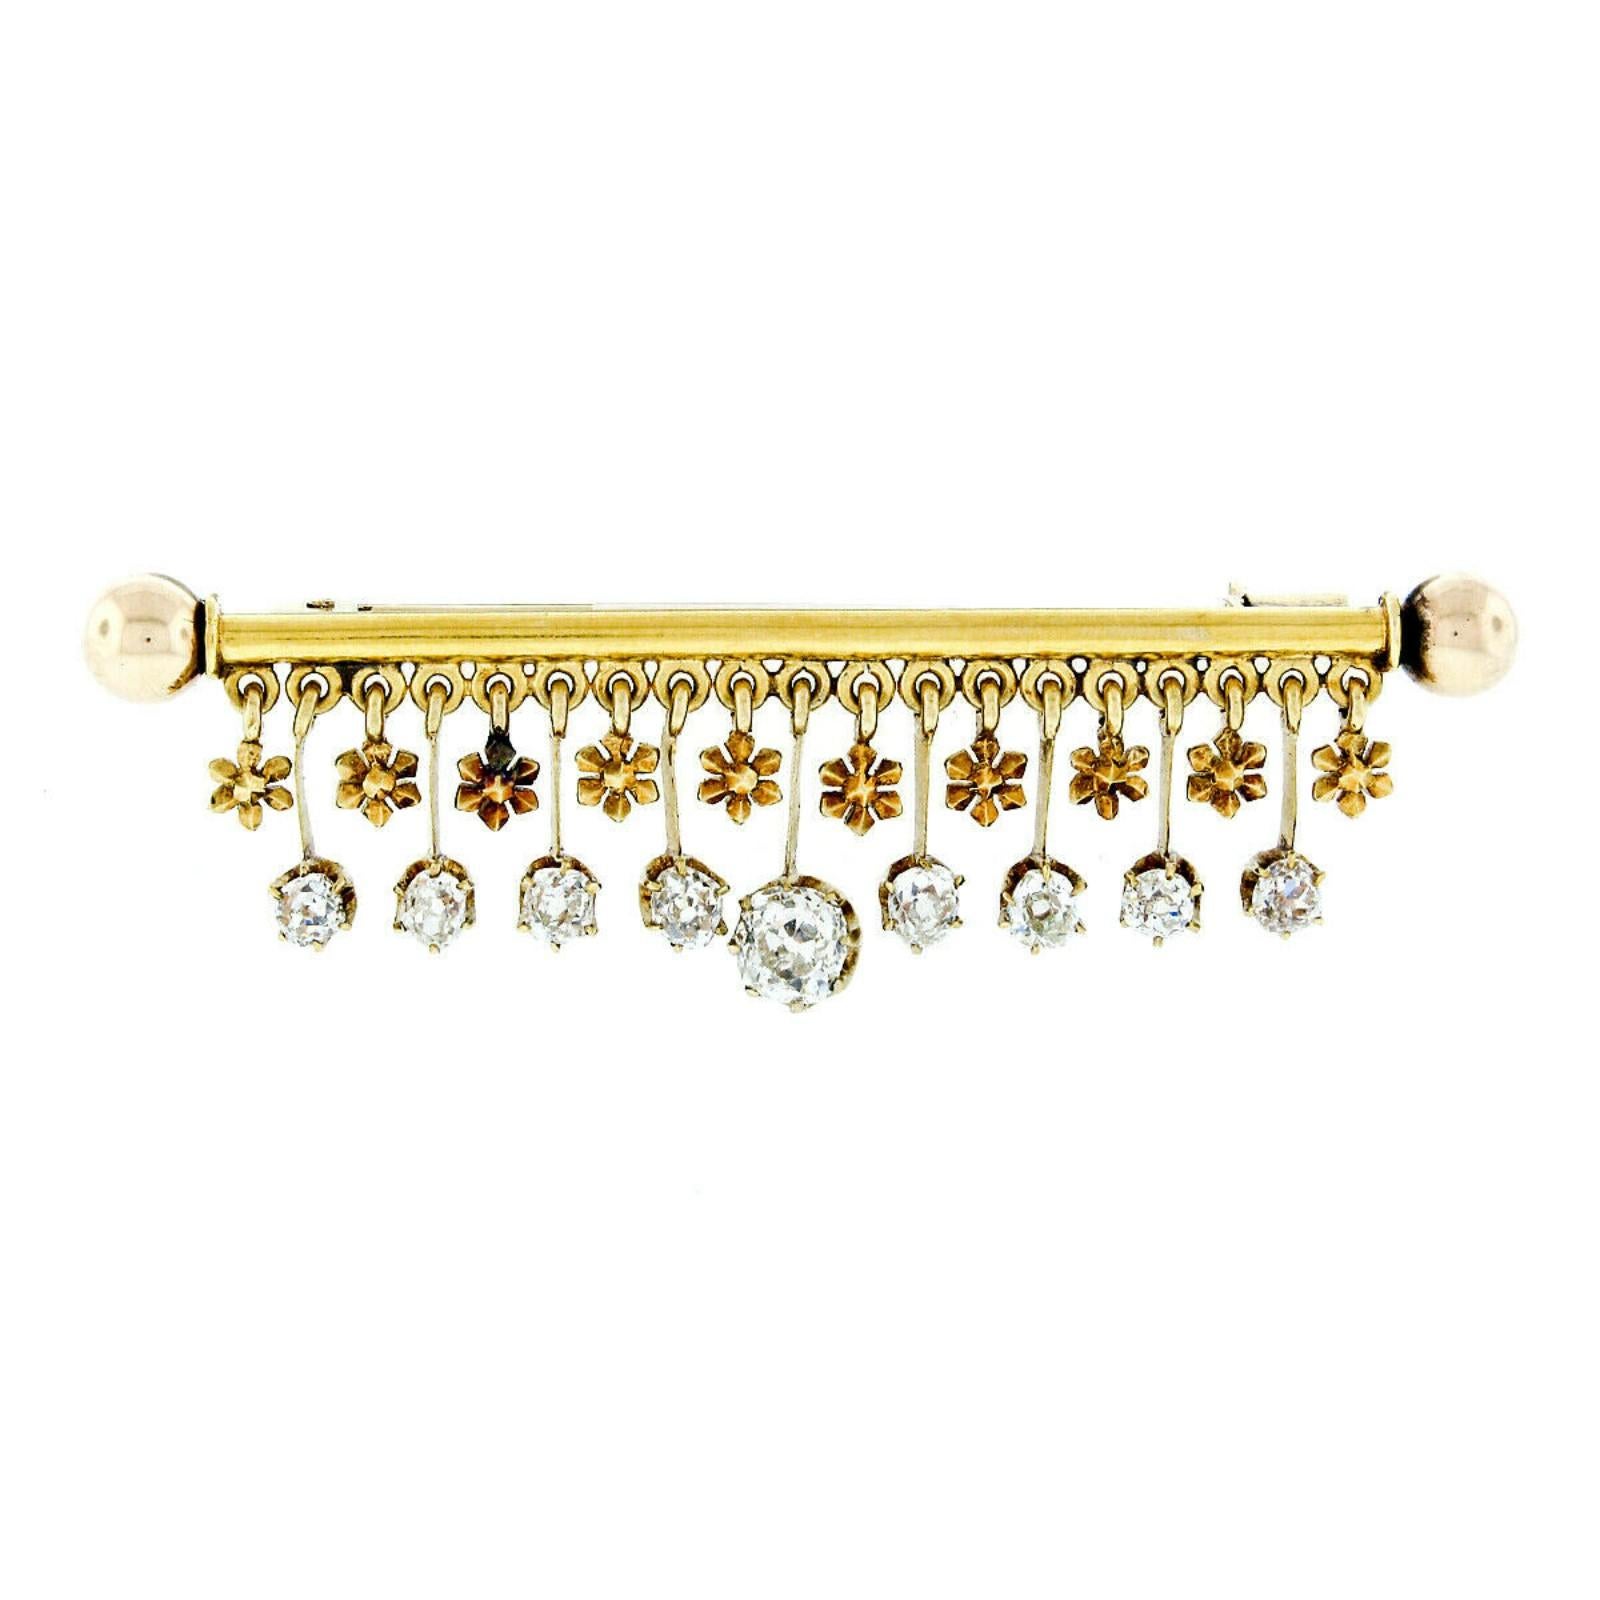 Here we have an absolutely magnificent antique dangle bar pin crafted from solid 18k yellow gold during the Victorian era. The pin features a cylindrical rod with spheres on its ends. There are then 9 old mine cut diamonds and 10 handmade six-petal